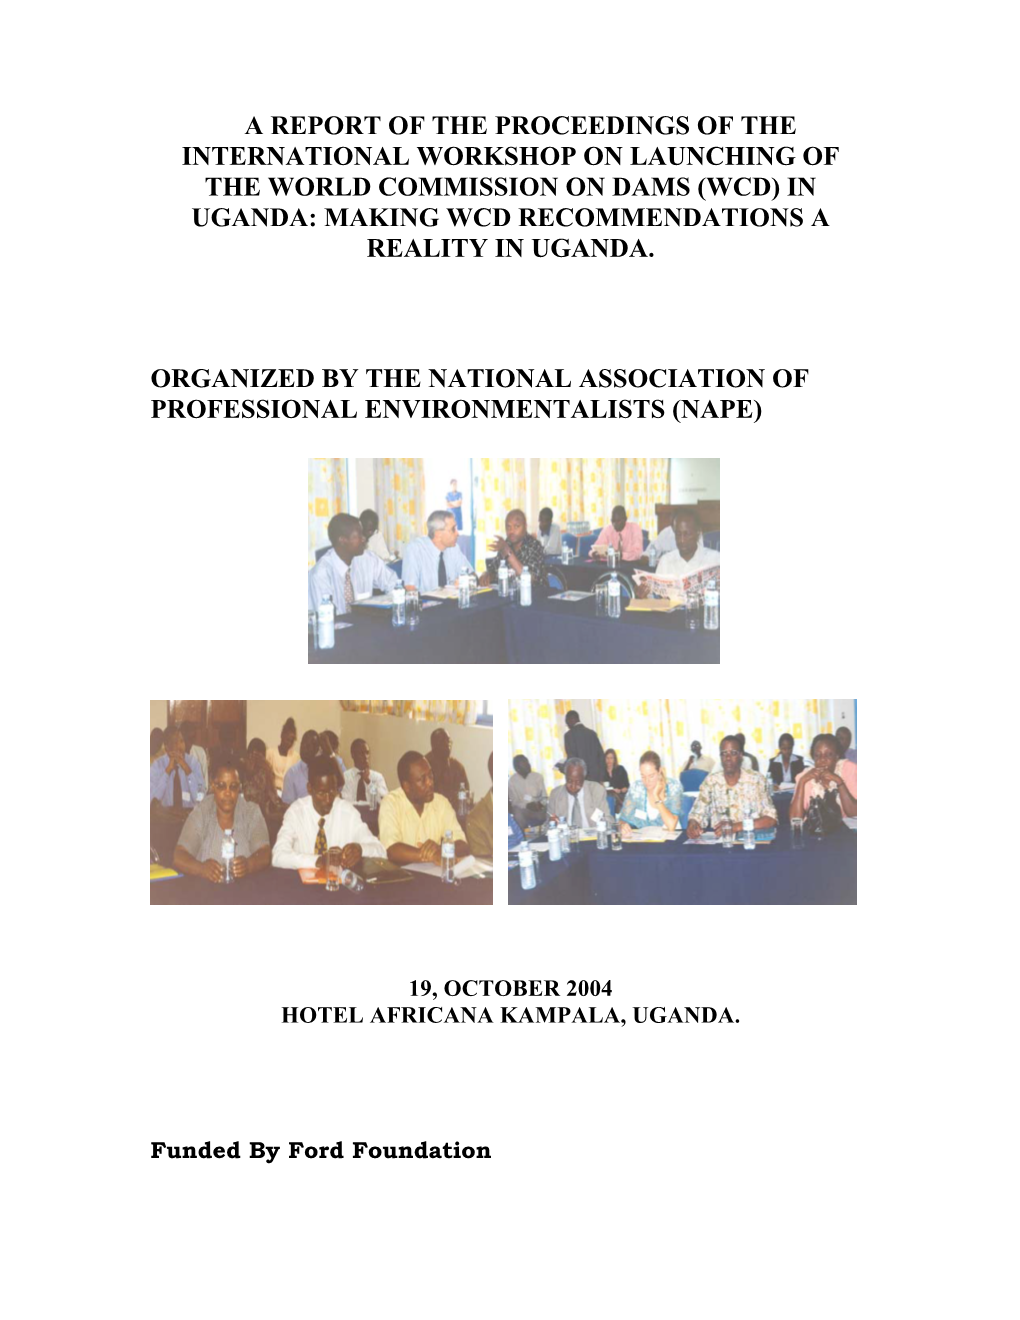 In Uganda: Making Wcd Recommendations a Reality in Uganda